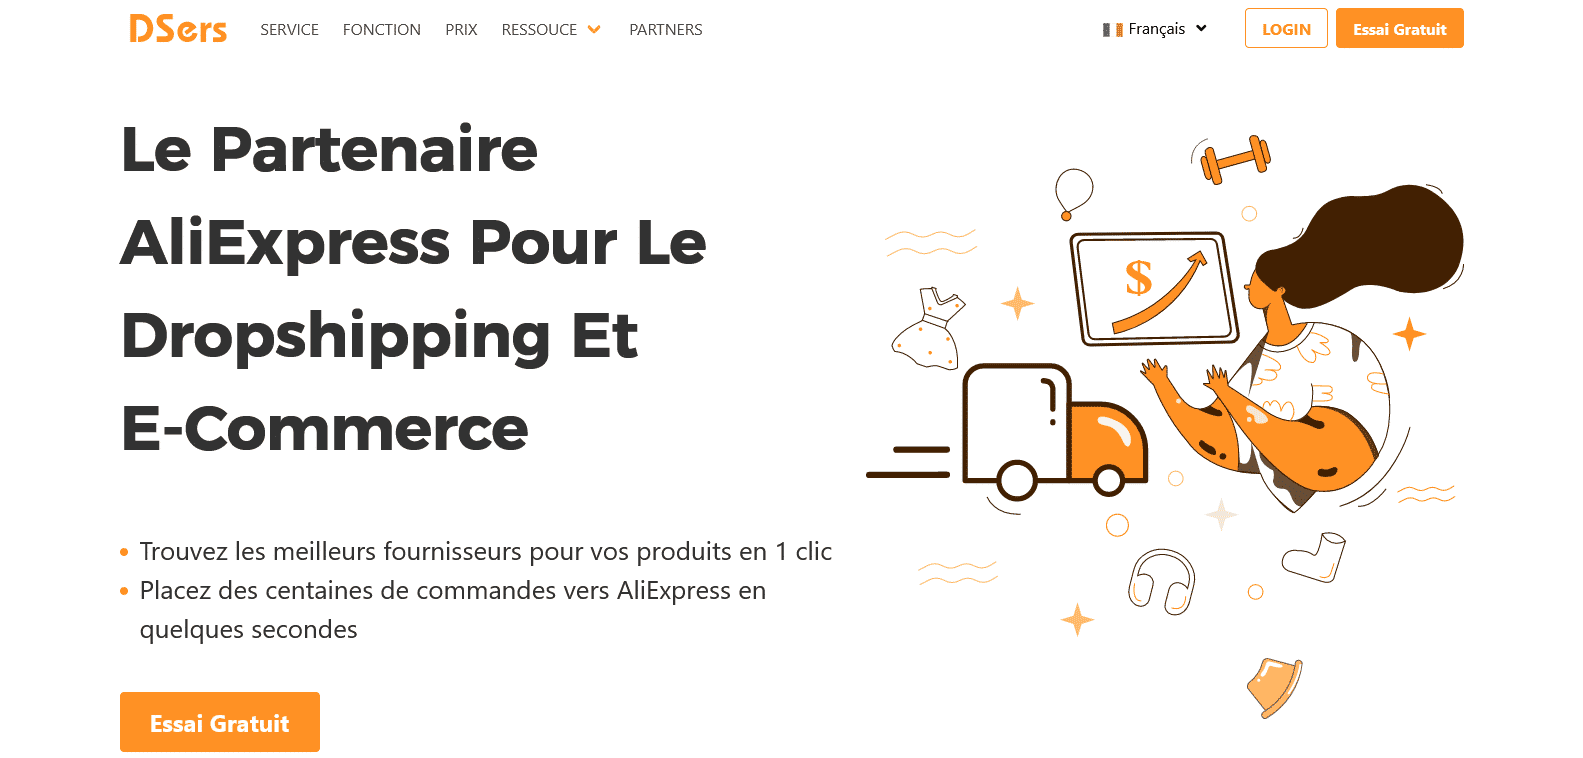 Dsers AliExpress Dropshipping